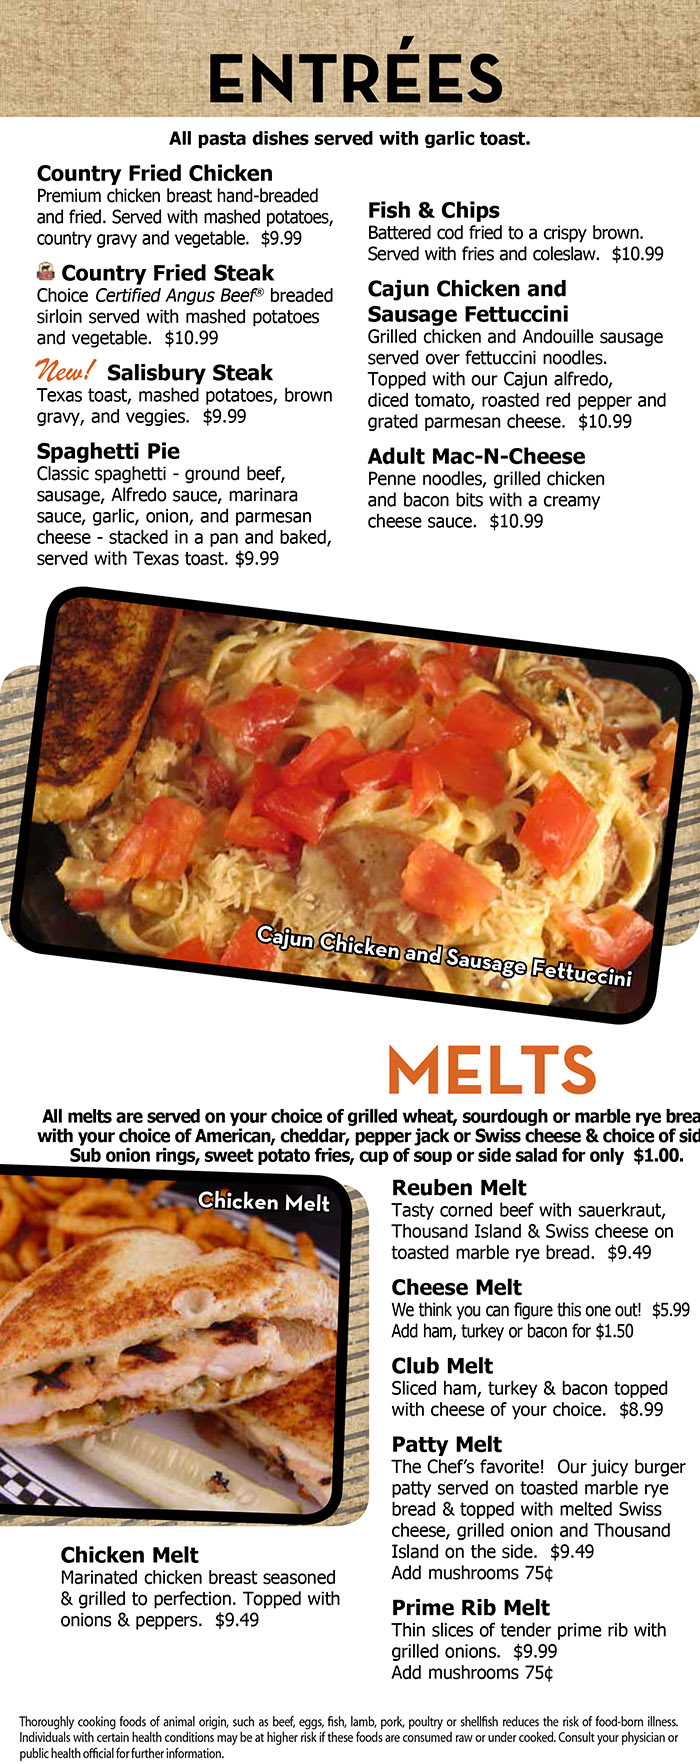 Heidelberg's Sports Bar & Grill Menu Page 4
  ENTRÉES
  All pasta dishes served with garlic toast
  Country Fried Chicken
Premium chicken breast hand-breaded
and fried. Served with mashed potatoes,
country gravy and vegetable. $9.99
Country Fried Steak
Choice Certified Angus Beef® breaded
sirloin served with mashed potatoes
and vegetable. $10.99
New! Salisbury Steak
Texas toast, mashed potatoes, brown
gravy, and veggies. $9.99
Spaghetti Pie
Classic spaghetti - ground beef,
sausage, Alfredo sauce, marinara
sauce, garlic, onion, and parmesan
cheese - stacked in a pan and baked,
served with Texas toast. $9.99
Fish & Chips
Battered cod fried to a crispy brown.
Served with fries and coleslaw. $10.99
Cajun Chicken and
Sausage Fettuccini
Grilled chicken and Andouille sausage
served over fettuccini noodles.
Topped with our Cajun alfredo,
diced tomato, roasted red pepper and
grated parmesan cheese. $10.99
Adult Mac-N-Cheese
Penne noodles, grilled chicken
and bacon bits with a creamy
cheese sauce. $10.99

MELTS
All melts are served on your choice of grilled wheat, sourdough or marble rye bread
with your choice of American, cheddar, pepper jack or Swiss cheese & choice of side.
Sub onion rings, sweet potato fries, cup of soup or side salad for only $1.00.
Chicken Melt
Marinated chicken breast seasoned
& grilled to perfection. Topped with
onions & peppers. $9.49
Reuben Melt
Tasty corned beef with sauerkraut,
Thousand Island & Swiss cheese on
toasted marble rye bread. $9.49
Cheese Melt
We think you can figure this one out! $5.99
Add ham, turkey or bacon for $1.50
Club Melt
Sliced ham, turkey & bacon topped
with cheese of your choice. $8.99
Patty Melt
The Chef’s favorite! Our juicy burger
patty served on toasted marble rye
bread & topped with melted Swiss
cheese, grilled onion and Thousand
Island on the side. $9.49
Add mushrooms 75¢
Prime Rib Melt
Thin slices of tender prime rib with
grilled onions. $9.99
Add mushrooms 75¢